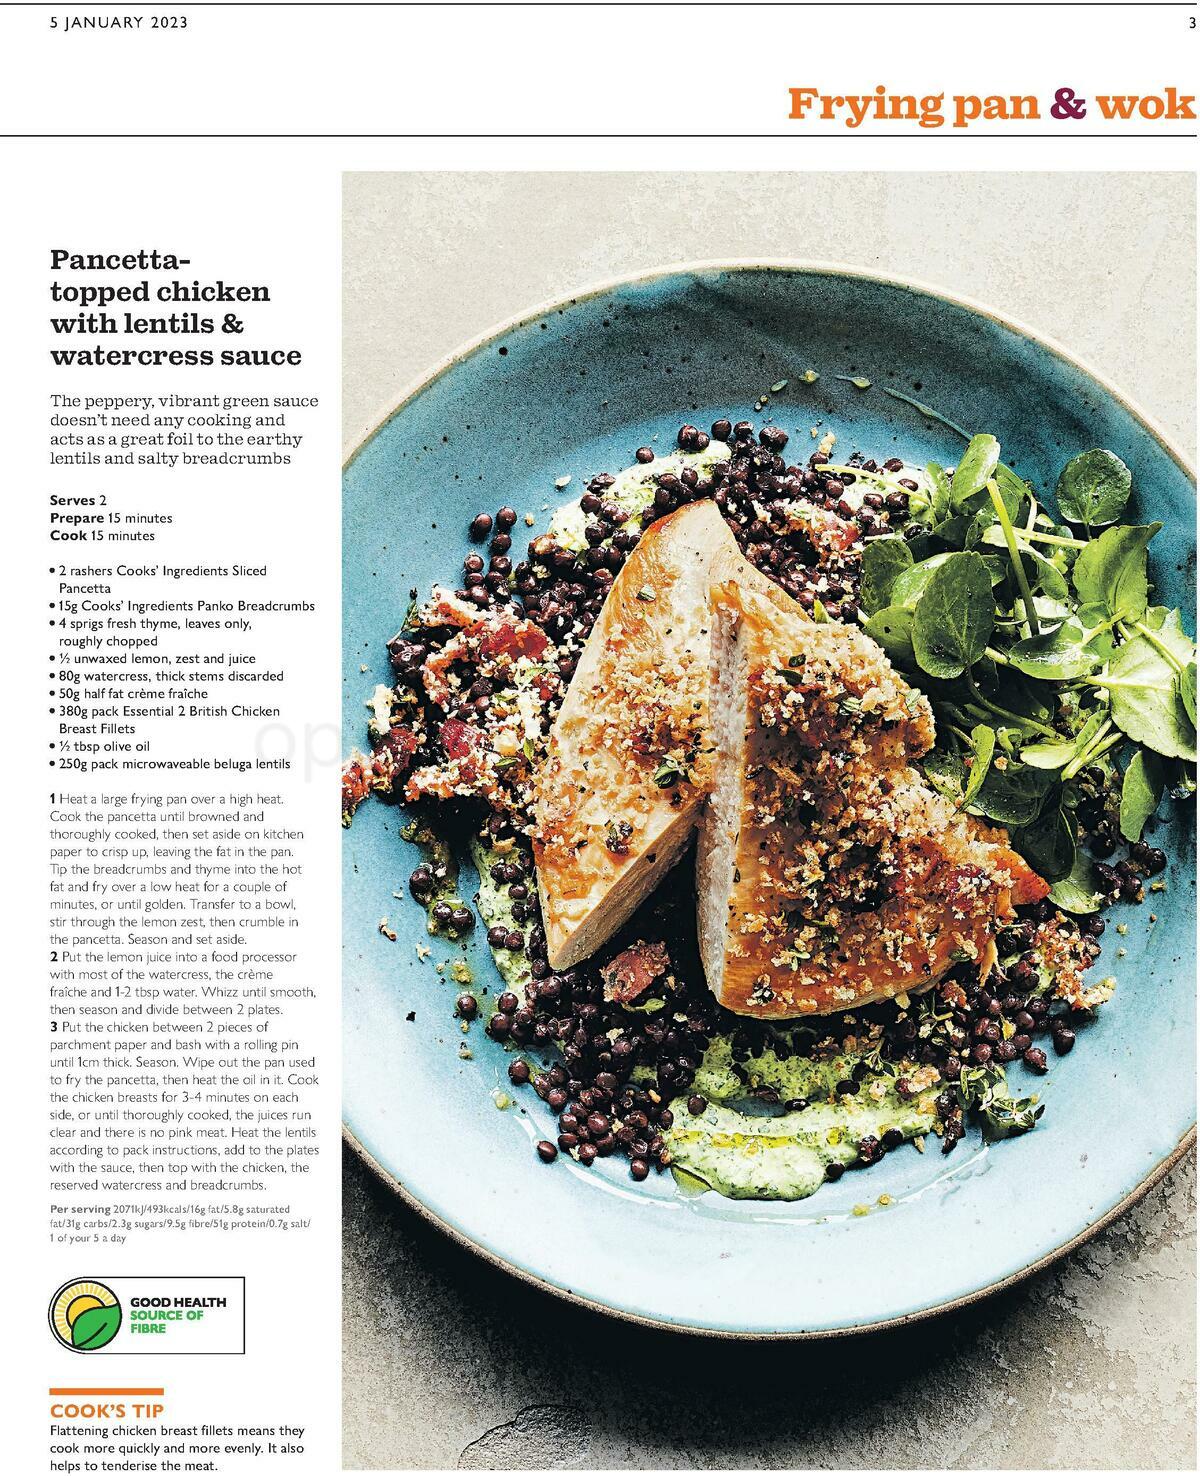 Waitrose Offers from 5 January